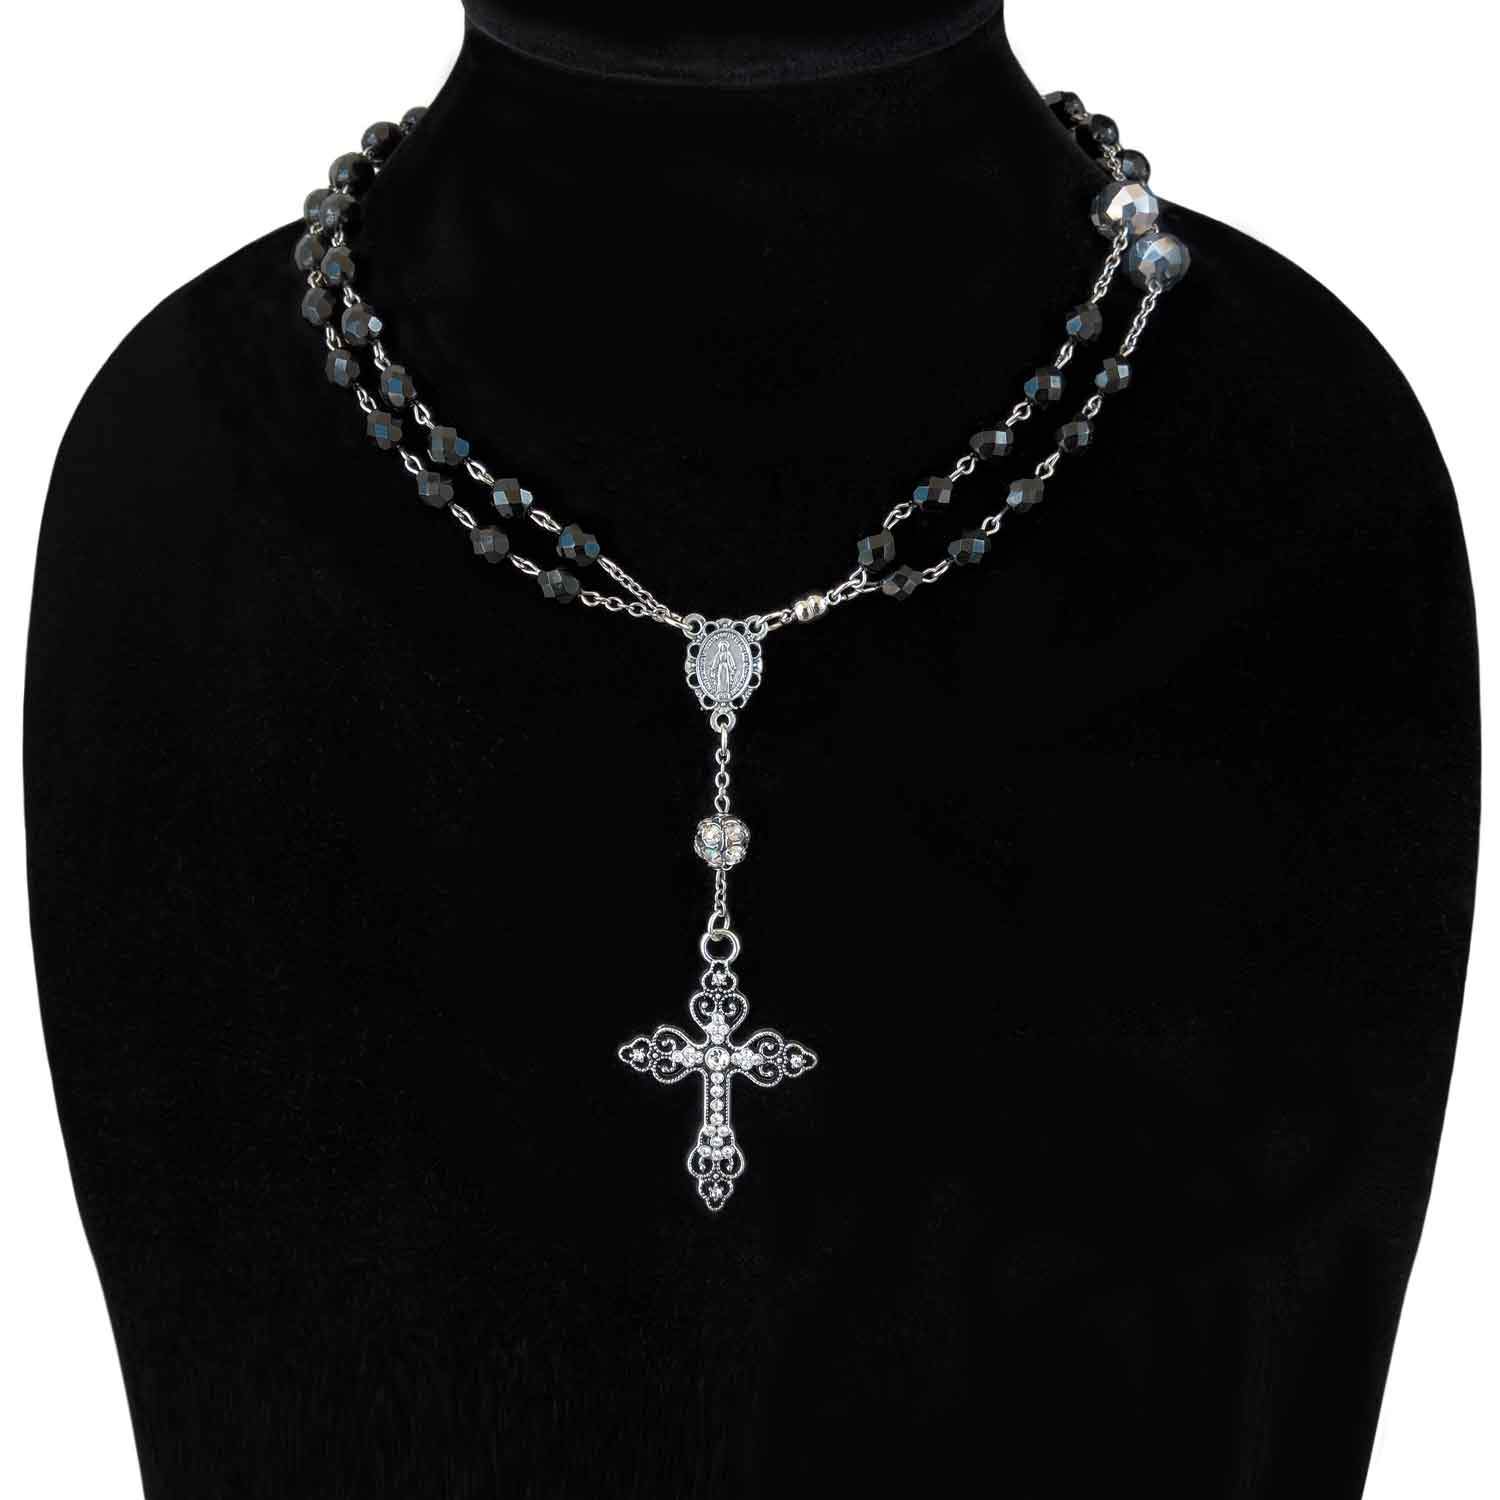 Ave Maria Rosary Necklace